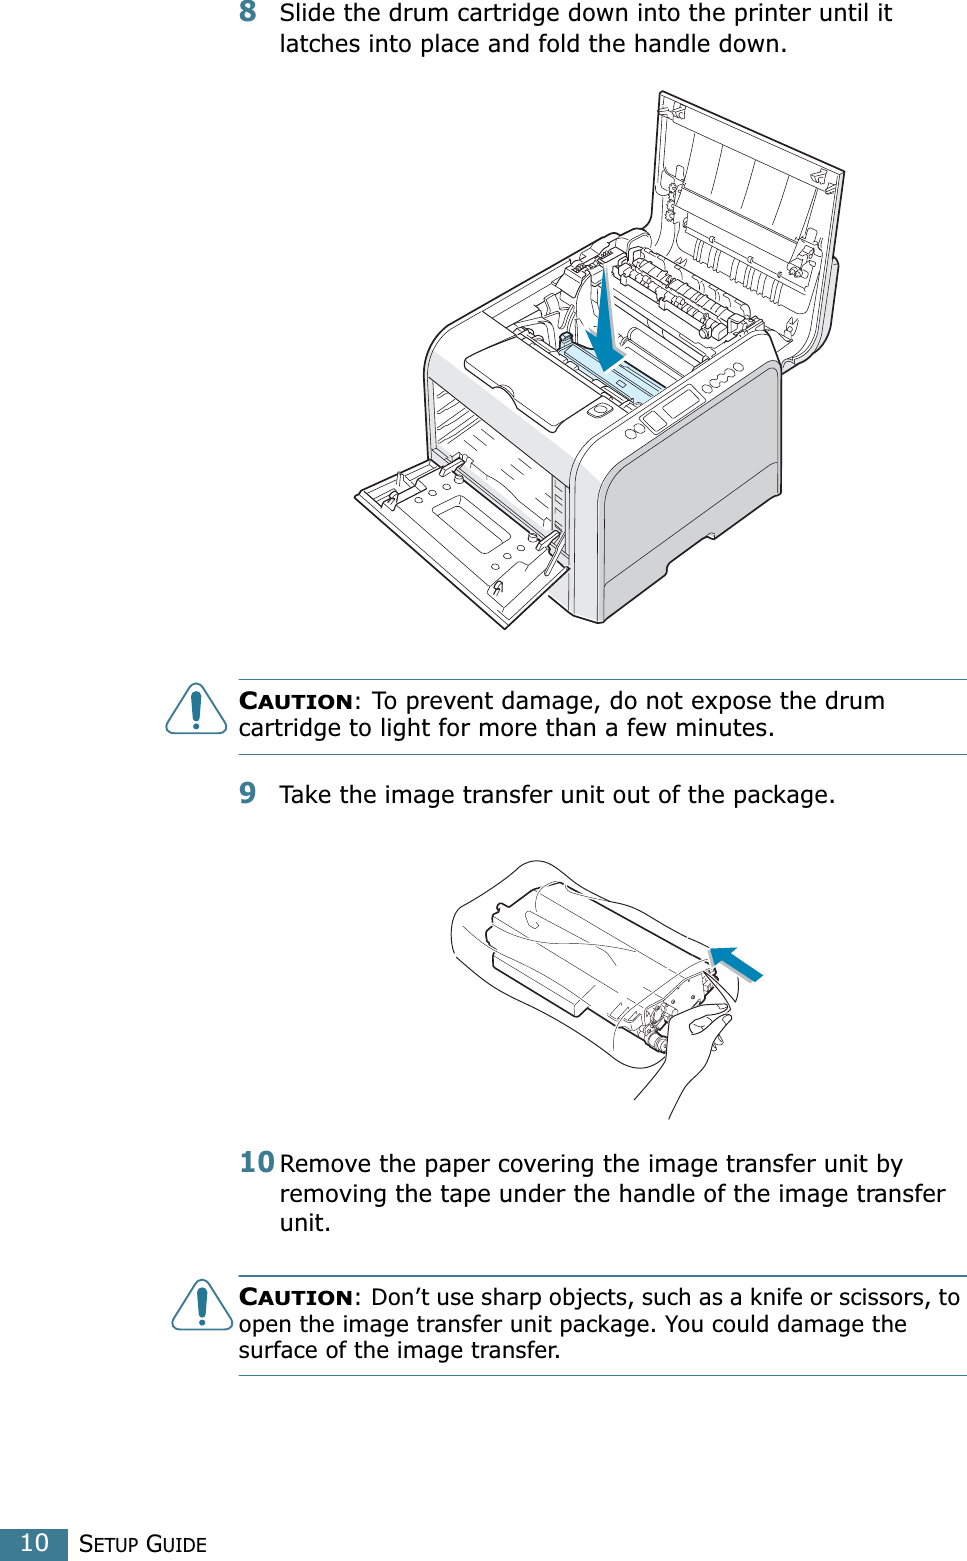 SETUP GUIDE108Slide the drum cartridge down into the printer until it latches into place and fold the handle down. CAUTION: To prevent damage, do not expose the drum cartridge to light for more than a few minutes.9Take the image transfer unit out of the package.10Remove the paper covering the image transfer unit by removing the tape under the handle of the image transfer unit.CAUTION: Don’t use sharp objects, such as a knife or scissors, to open the image transfer unit package. You could damage the surface of the image transfer.